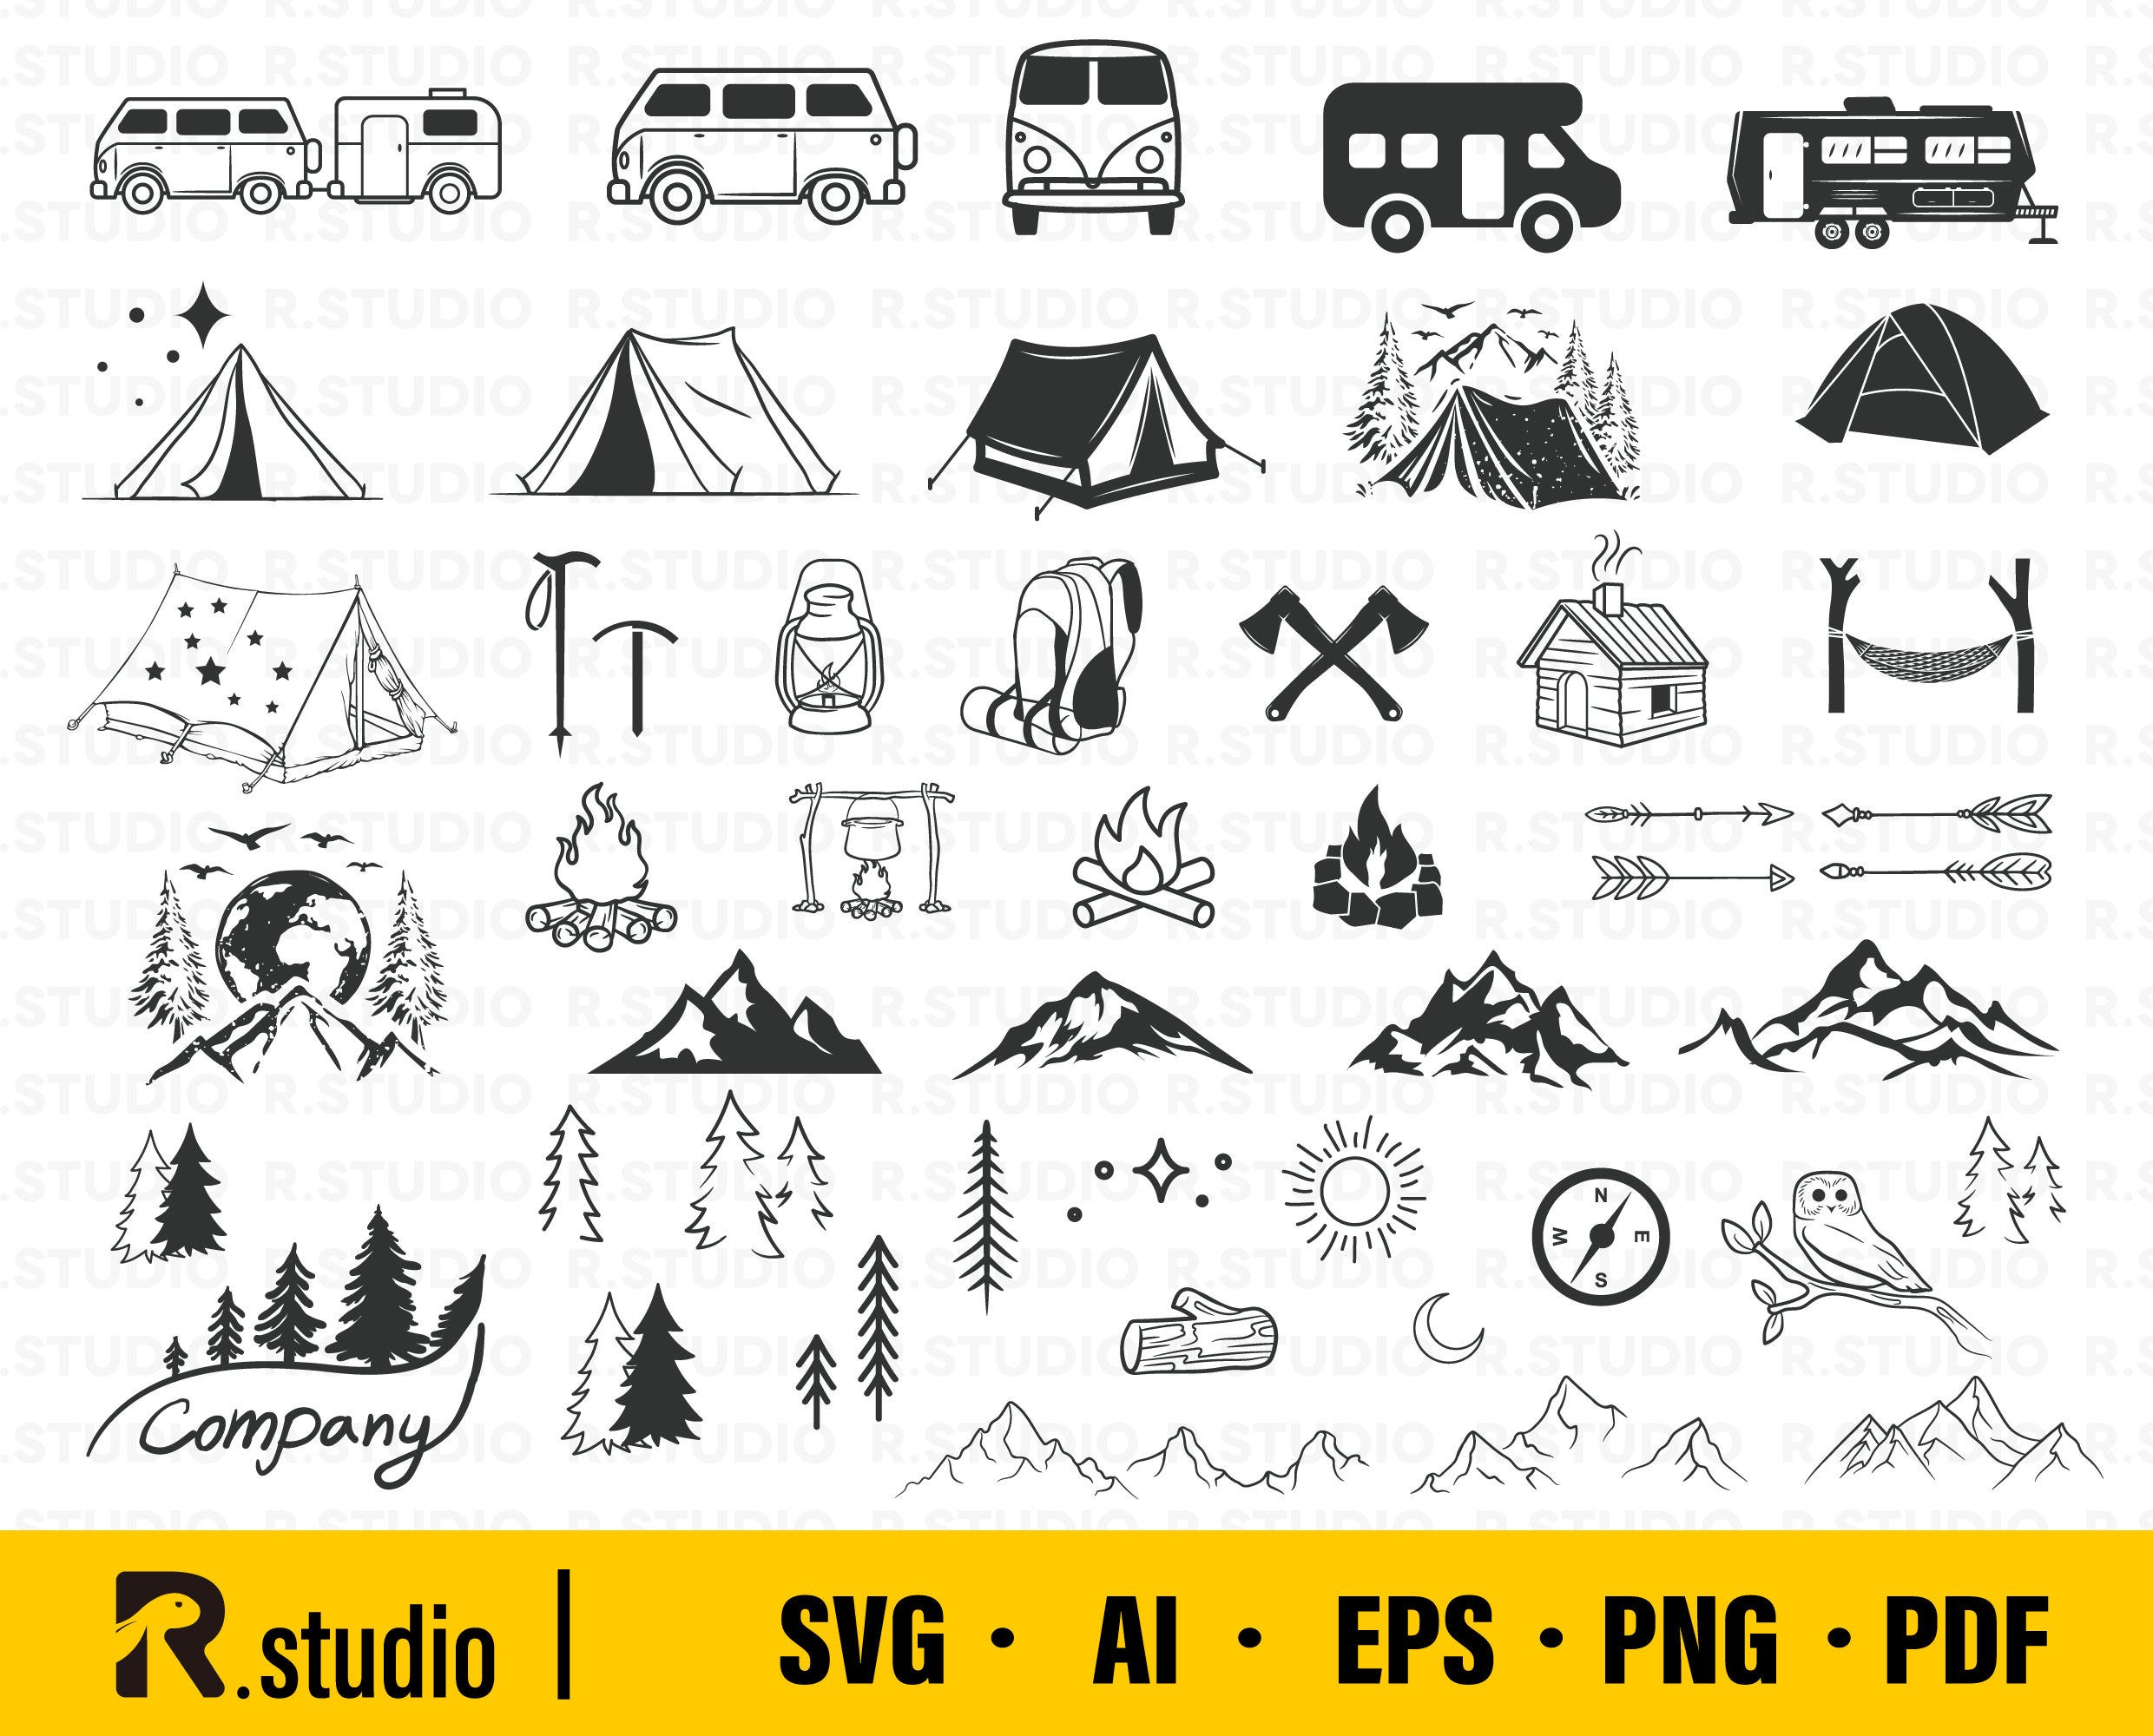 46 Camping SVG Bundle/ Camper Svg/ Camp Life Svg/ Campfire Svg/ Camping Tent Svg/ Cricut/ Cut Files/ Silhouette/ Vector/ Yellowstone svg